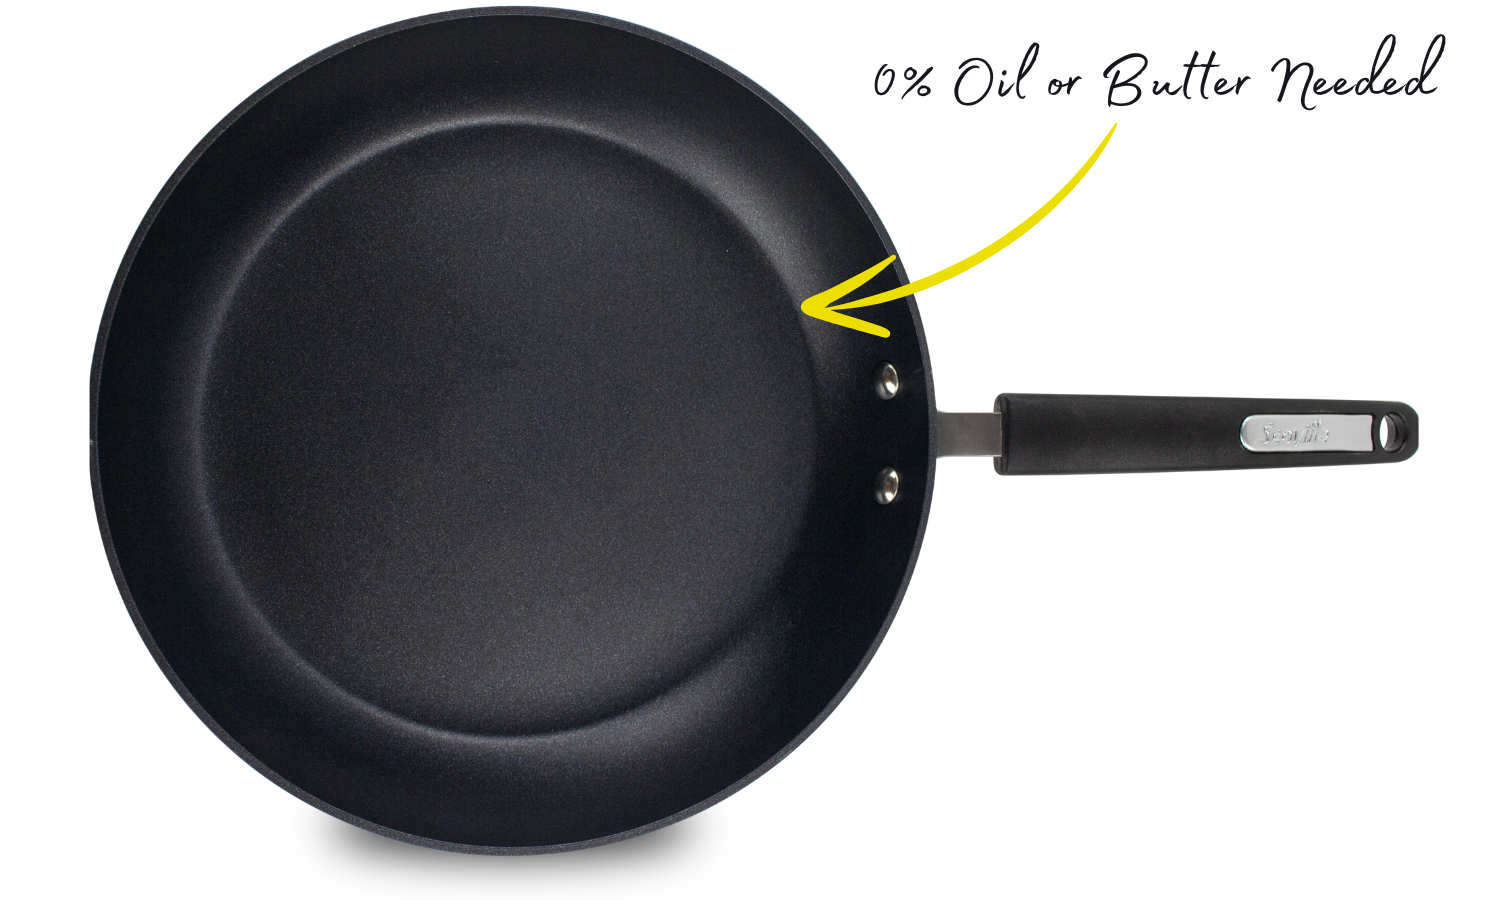 Scoville Always Non-Stick, 0% Oil or Butter Needed